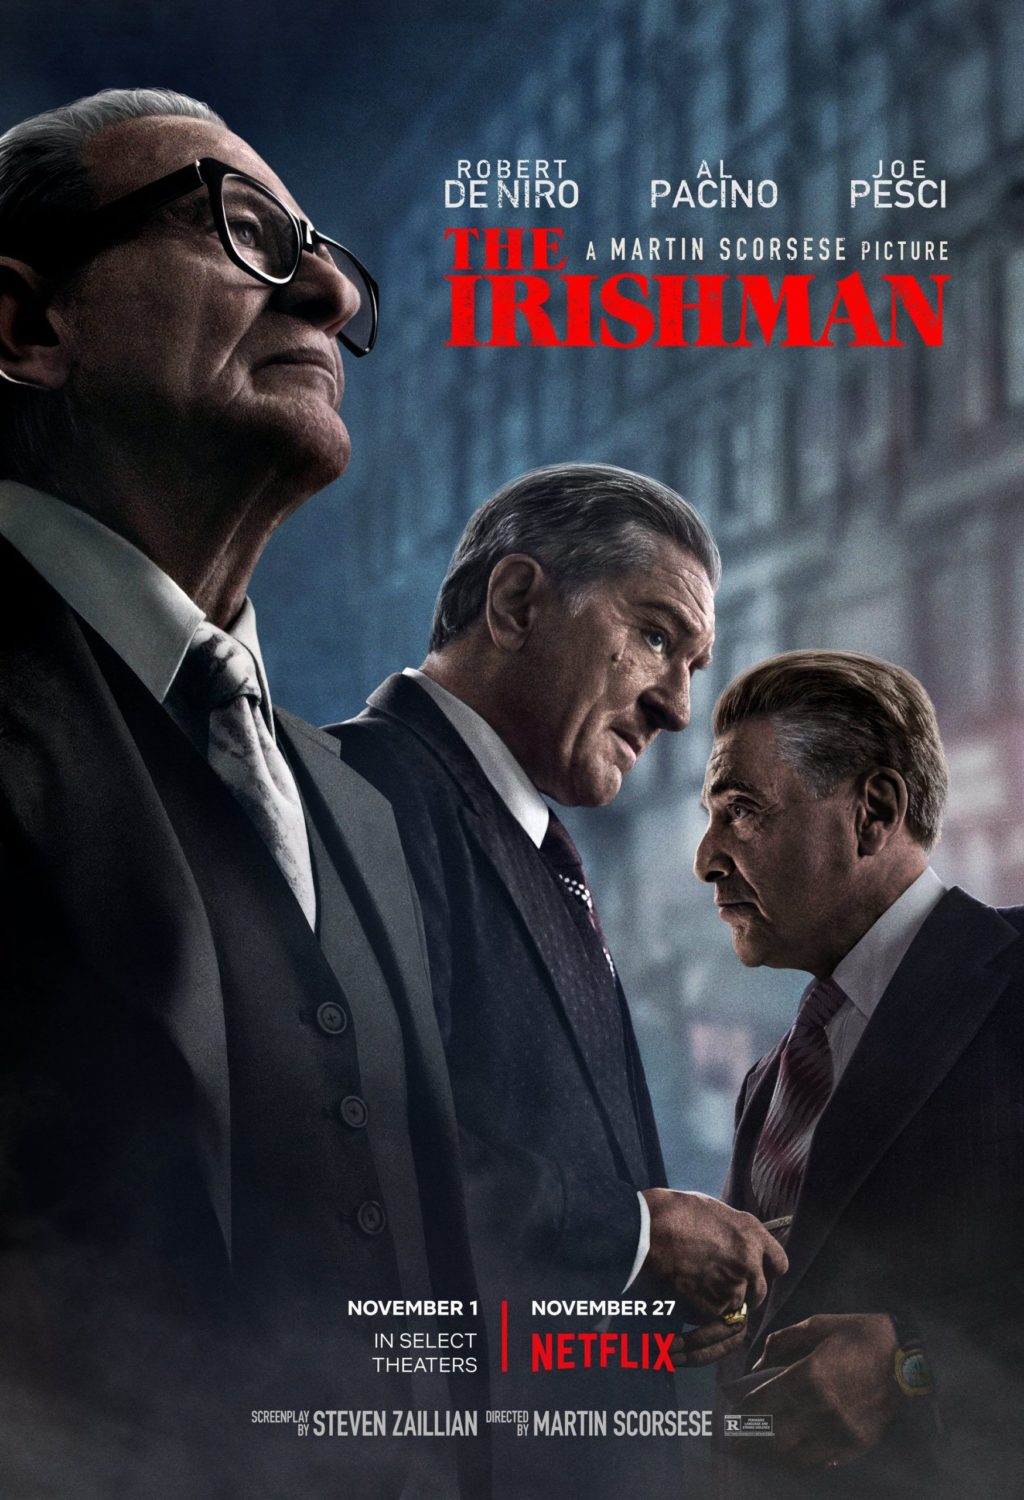 The Irishman poster from successful Lost Boys School of VFX alumni film credits for Visual Effects.